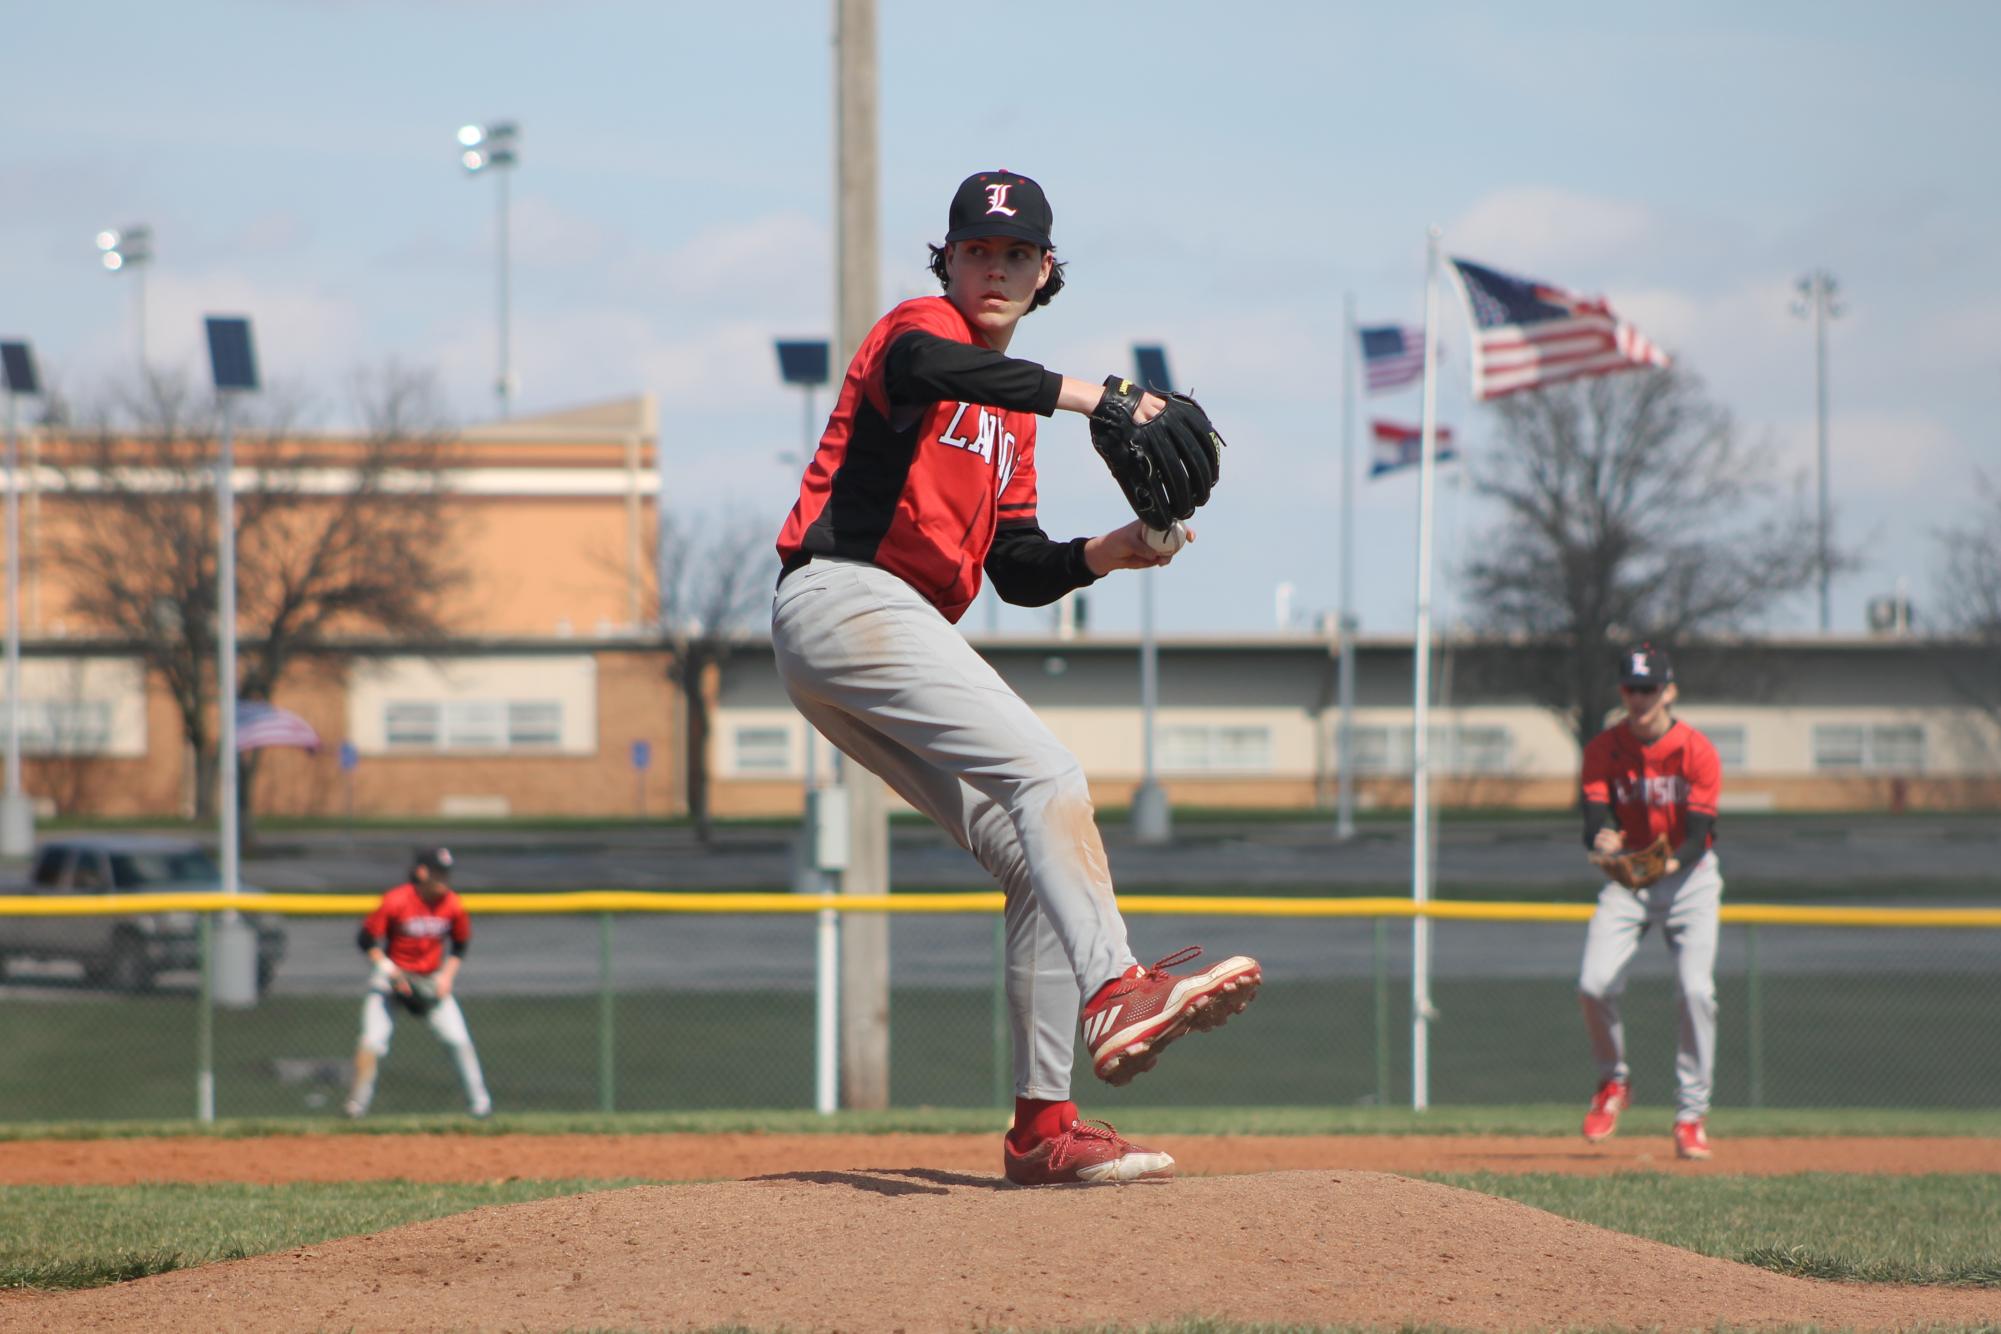 On March 16, junior Waylon Templeton pitches to the Lexington Minutemen batter in the second game of a varsity baseball double header. “I felt good going into the second game, Templeton said, and I trusted my defense.” Templeton led the Cardinals to a win, 15-5.